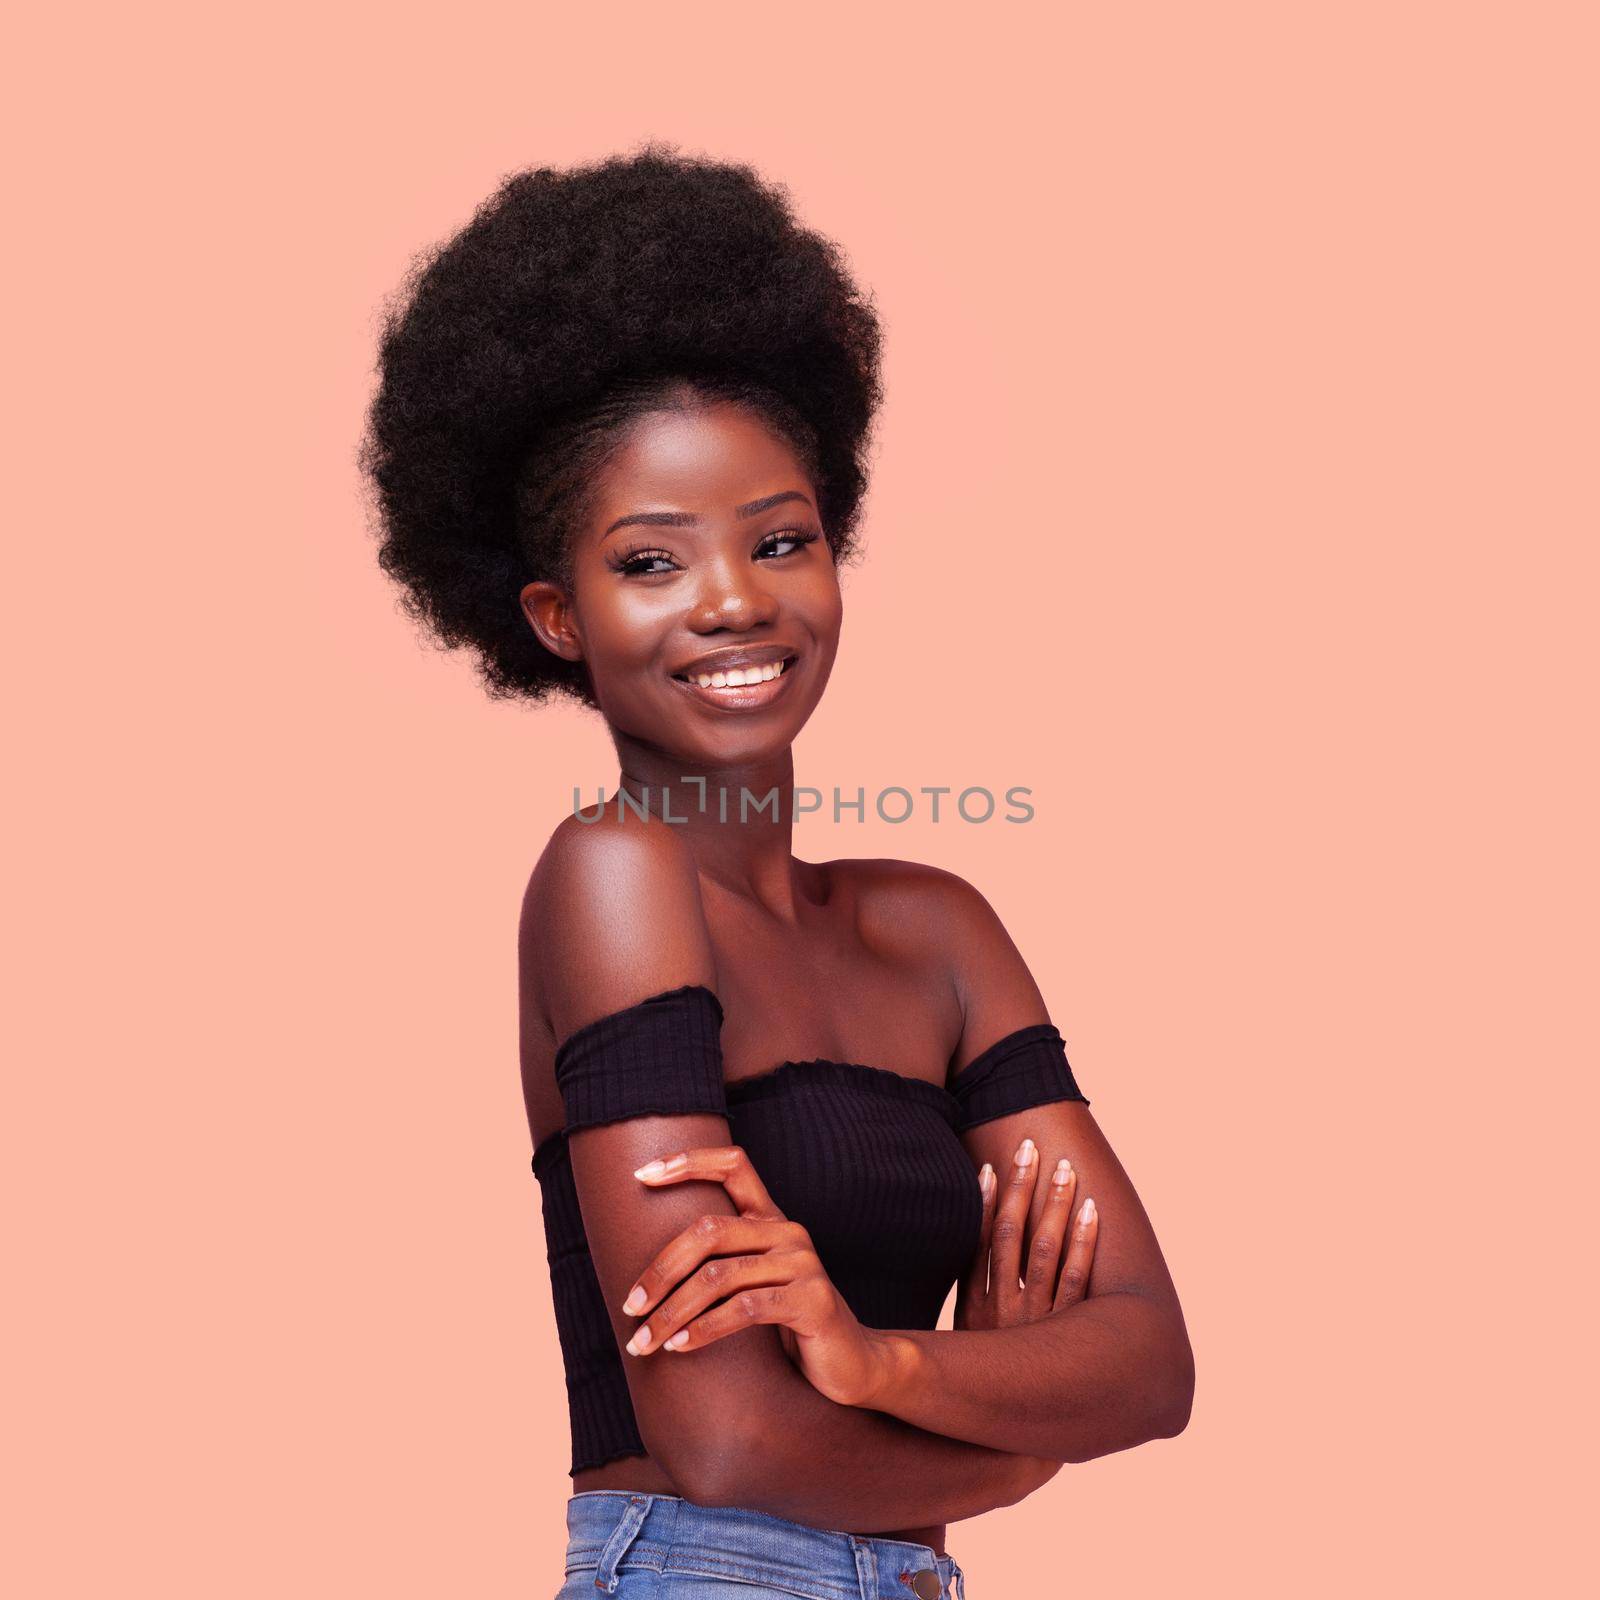 Square portrait of happy charming African American girl with amazing afro hairstyle smiling with arms folded. Dark-skinned lady wearing black bare shoulders top and denim jeans on peach background.